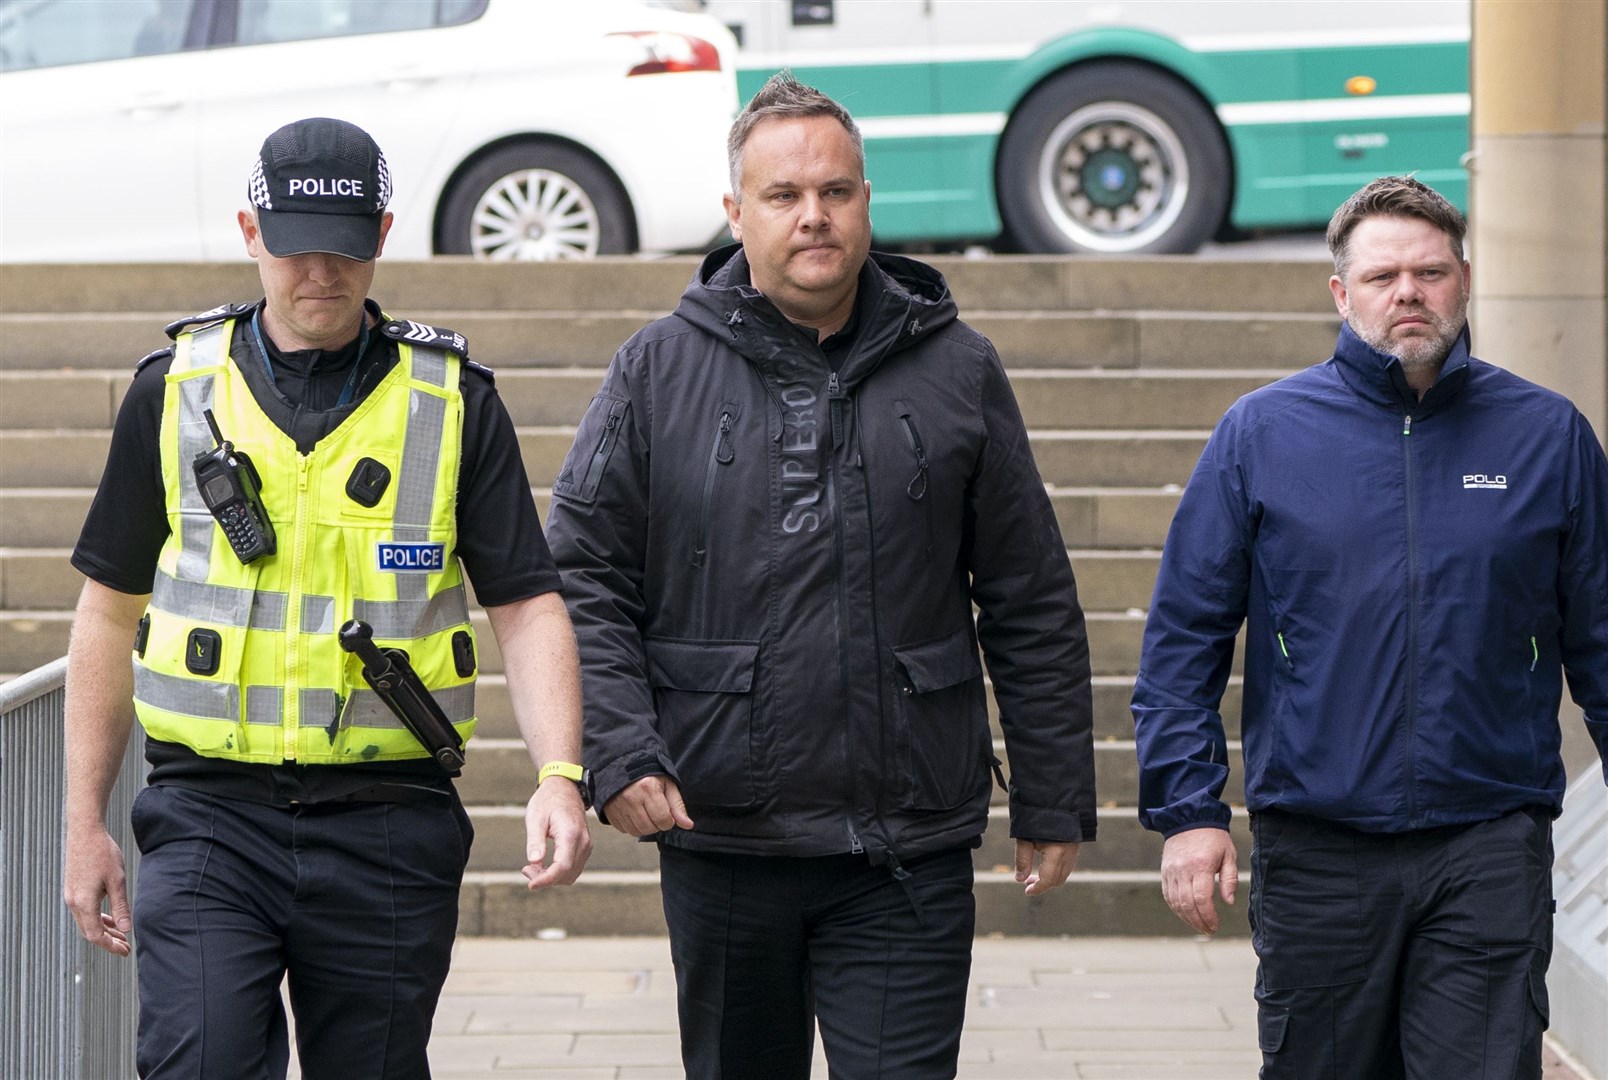 Sergeant Scott Maxwell (centre) arrives at Capital House in Edinburgh for the public inquiry into Sheku Bayoh’s death. Bayoh died in May 2015 after he was restrained by officers responding to a call in Kirkcaldy, Fife (Jane Barlow/PA)